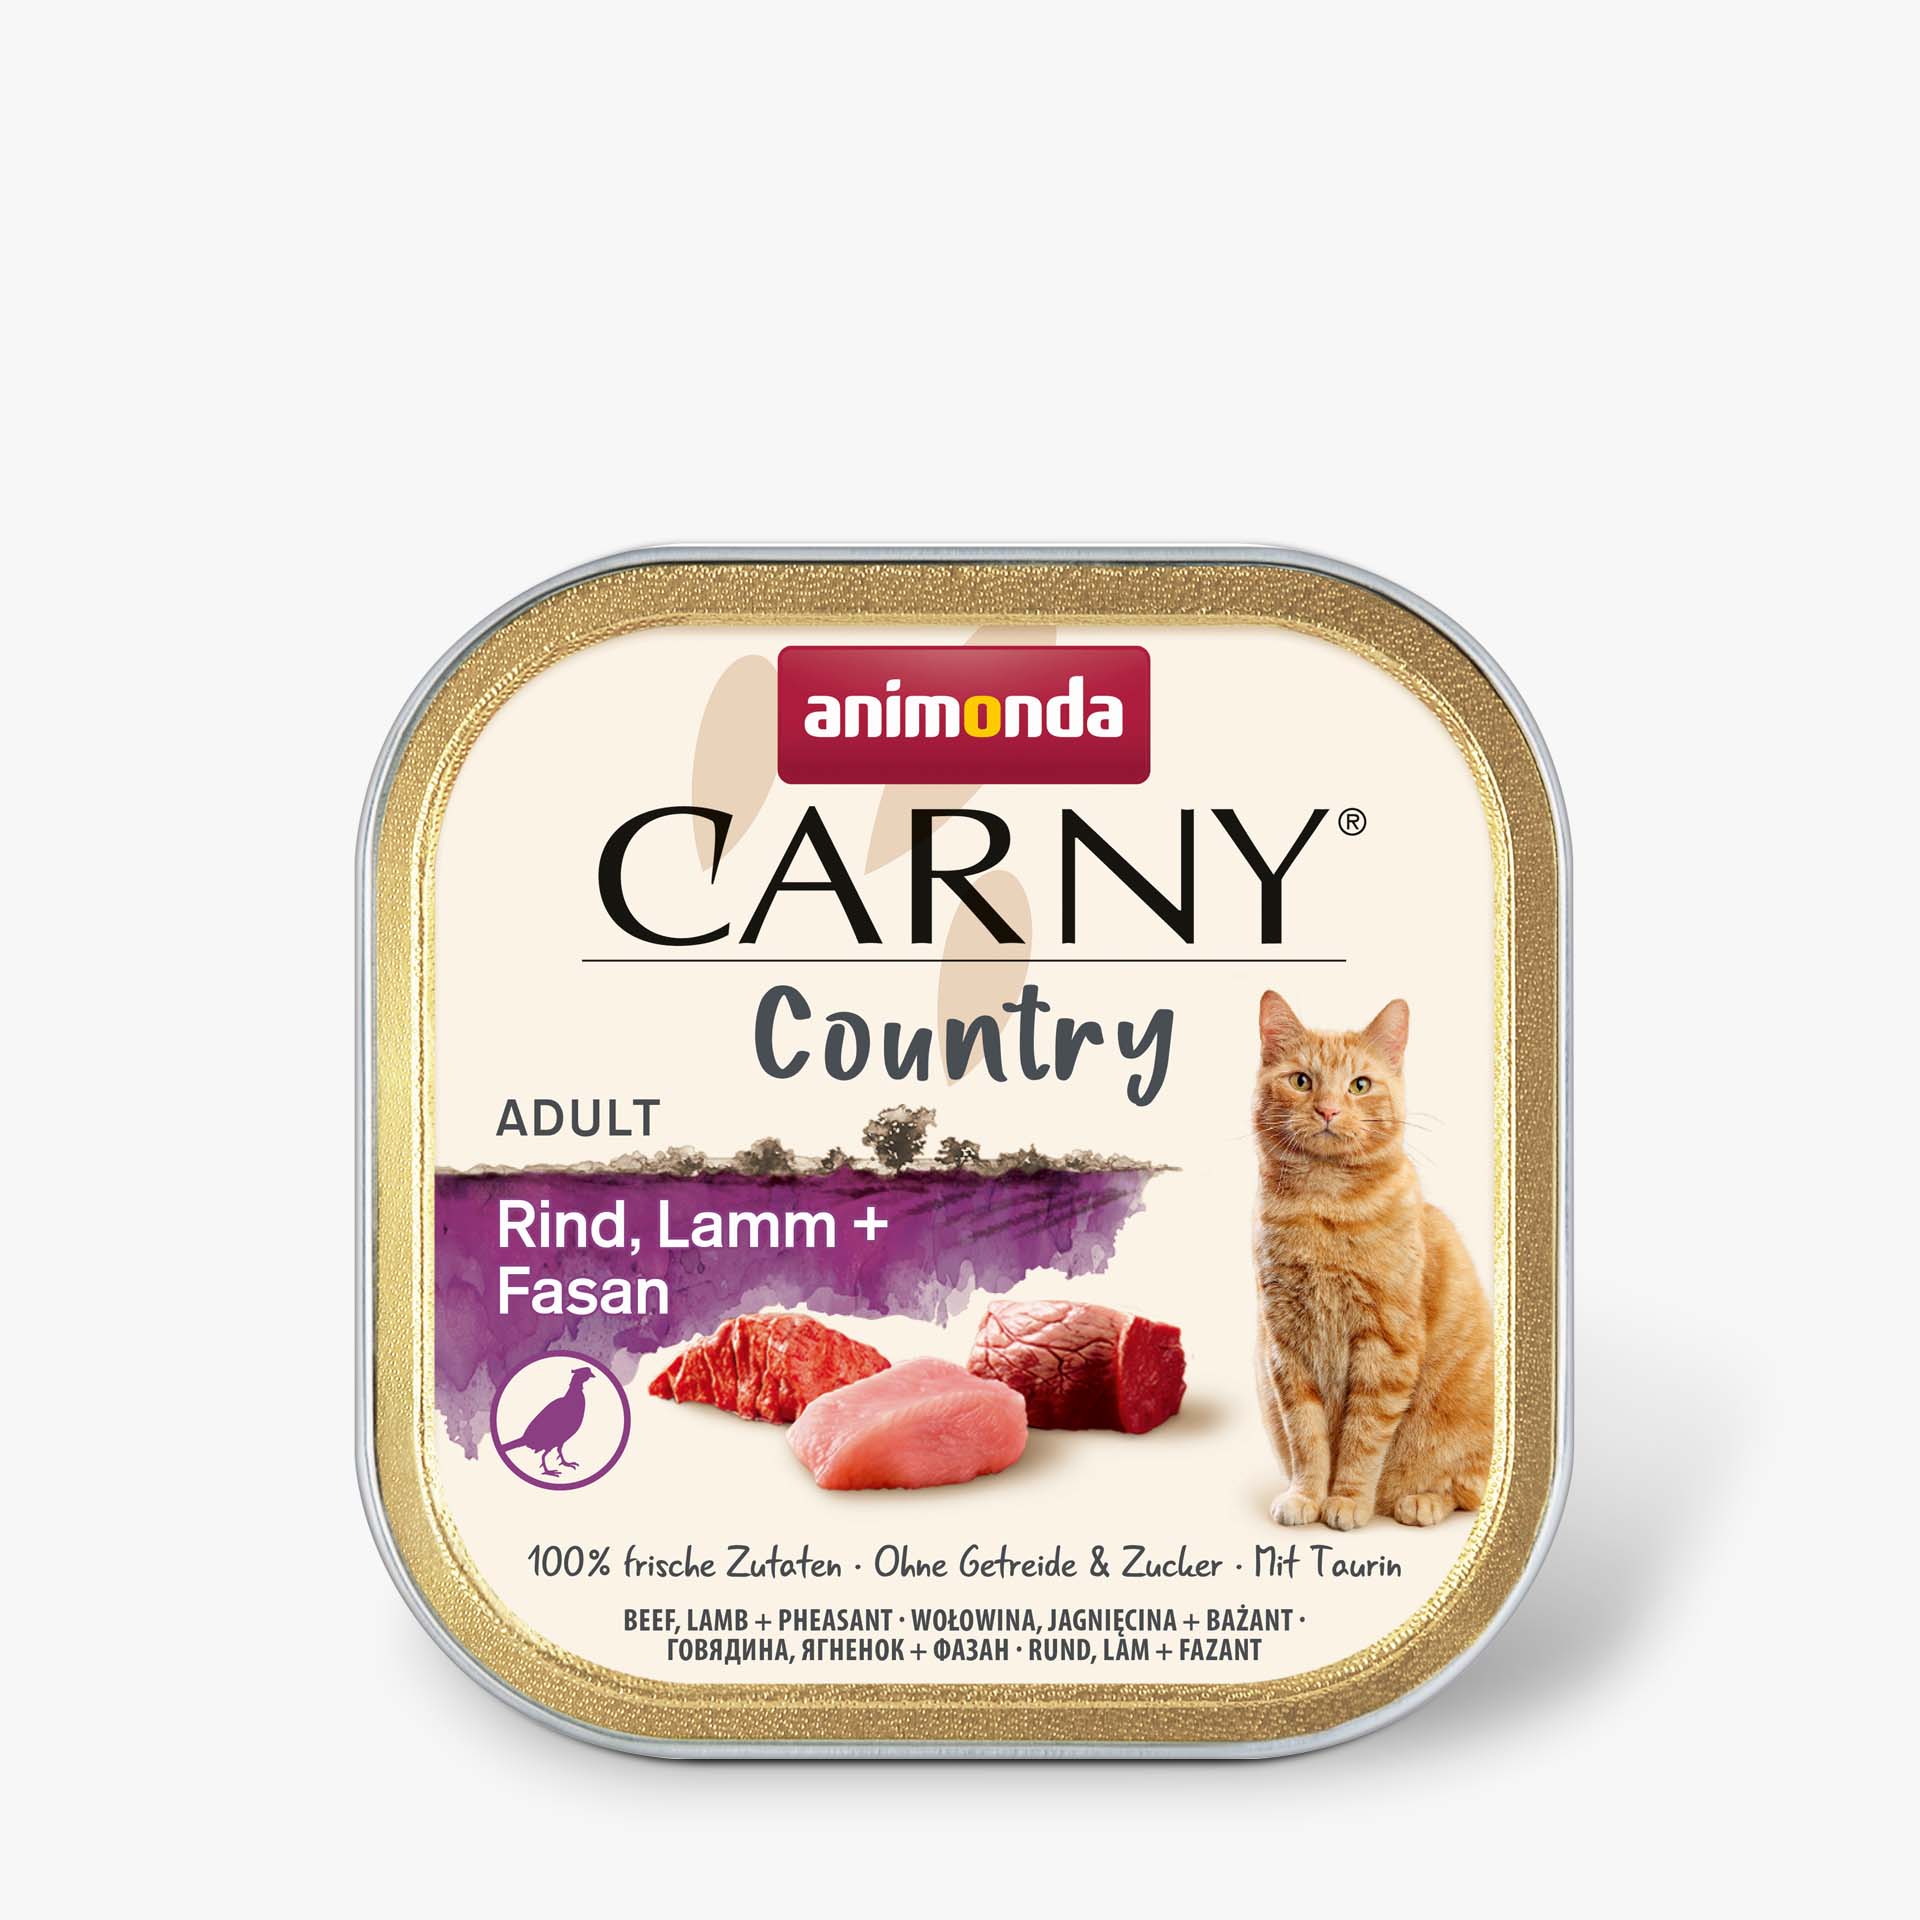 Carny Adult Country Rind, Lamm + Fasan